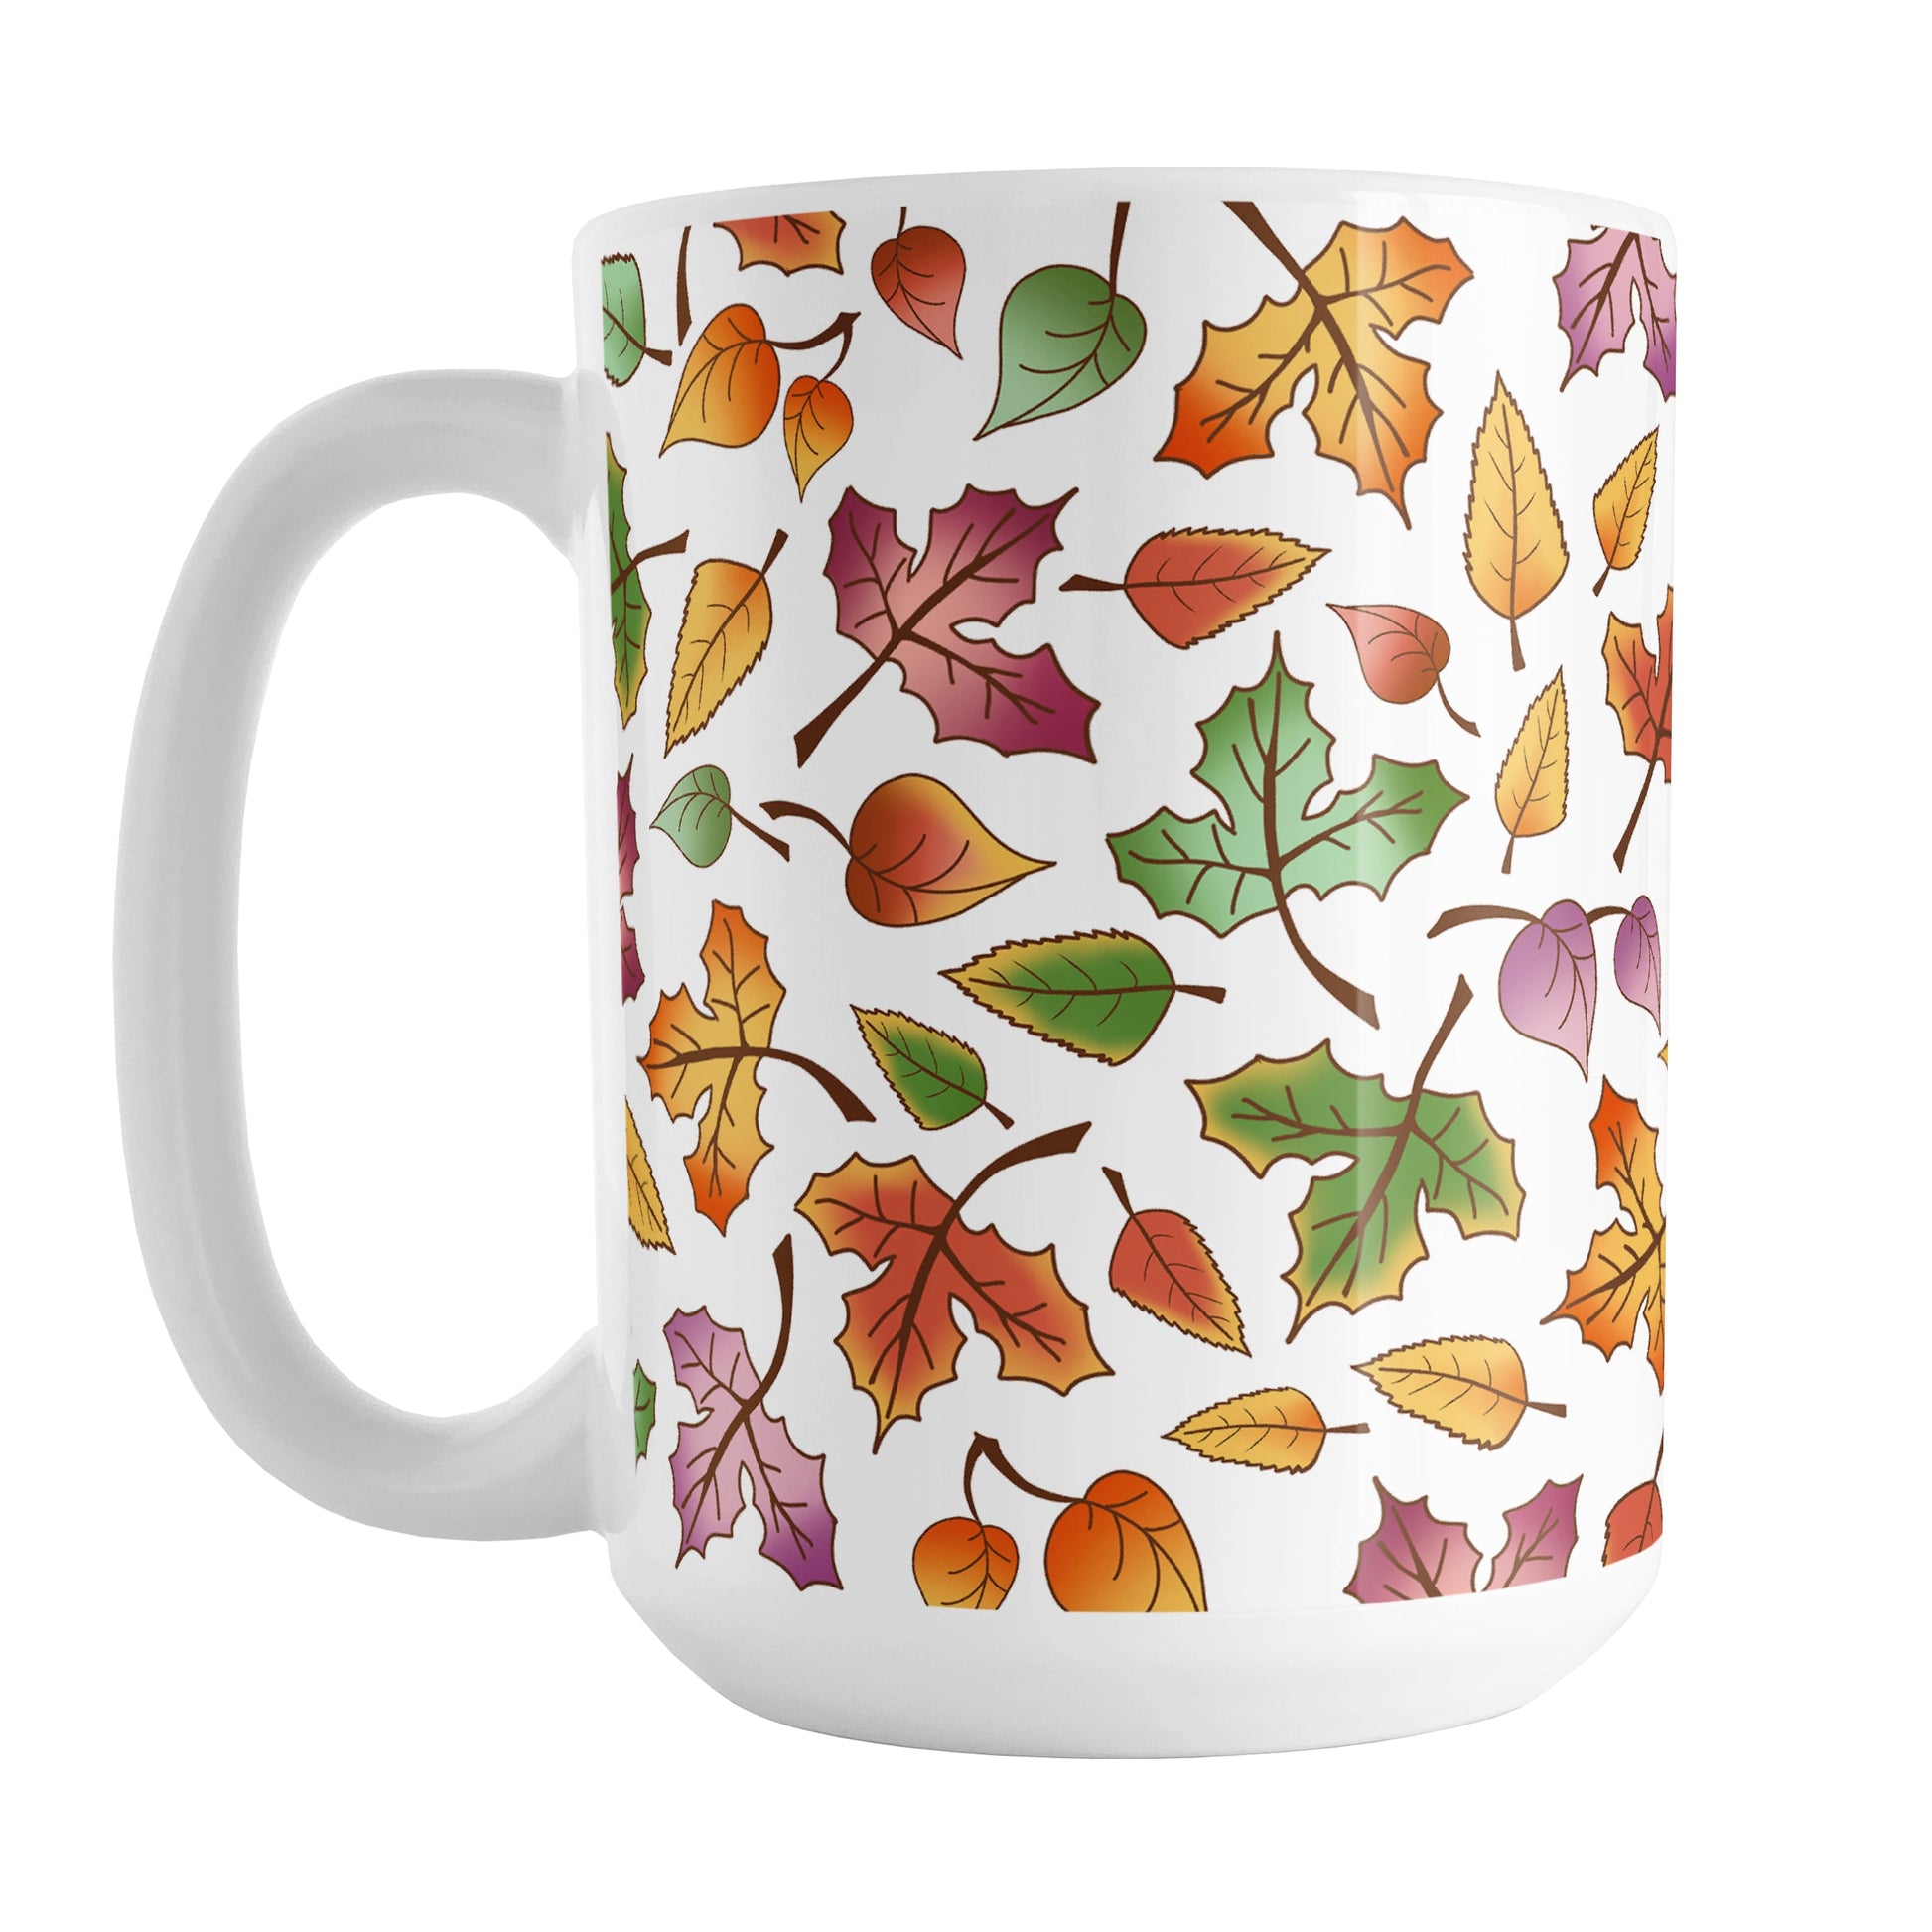 Changing Leaves Fall Mug (15oz) at Amy's Coffee Mugs. A ceramic coffee mug designed with a fall themed pattern of leaves changing colors, as they do at the beginning of autumn, that wraps around the mug.